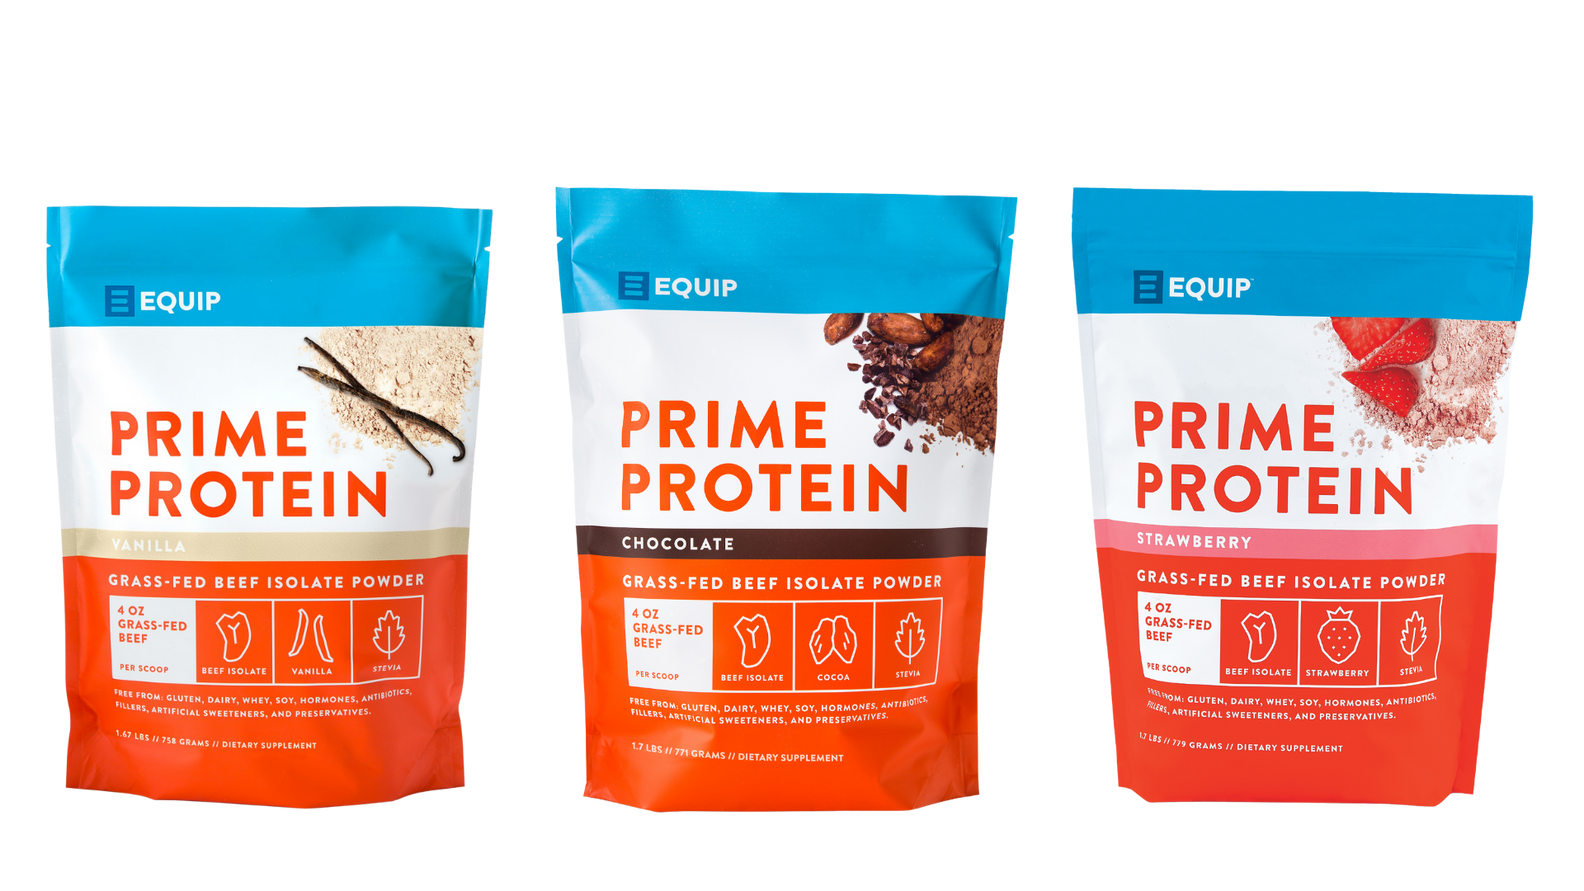 What Does Prime Protein Beef Isolate Protein Taste Like?